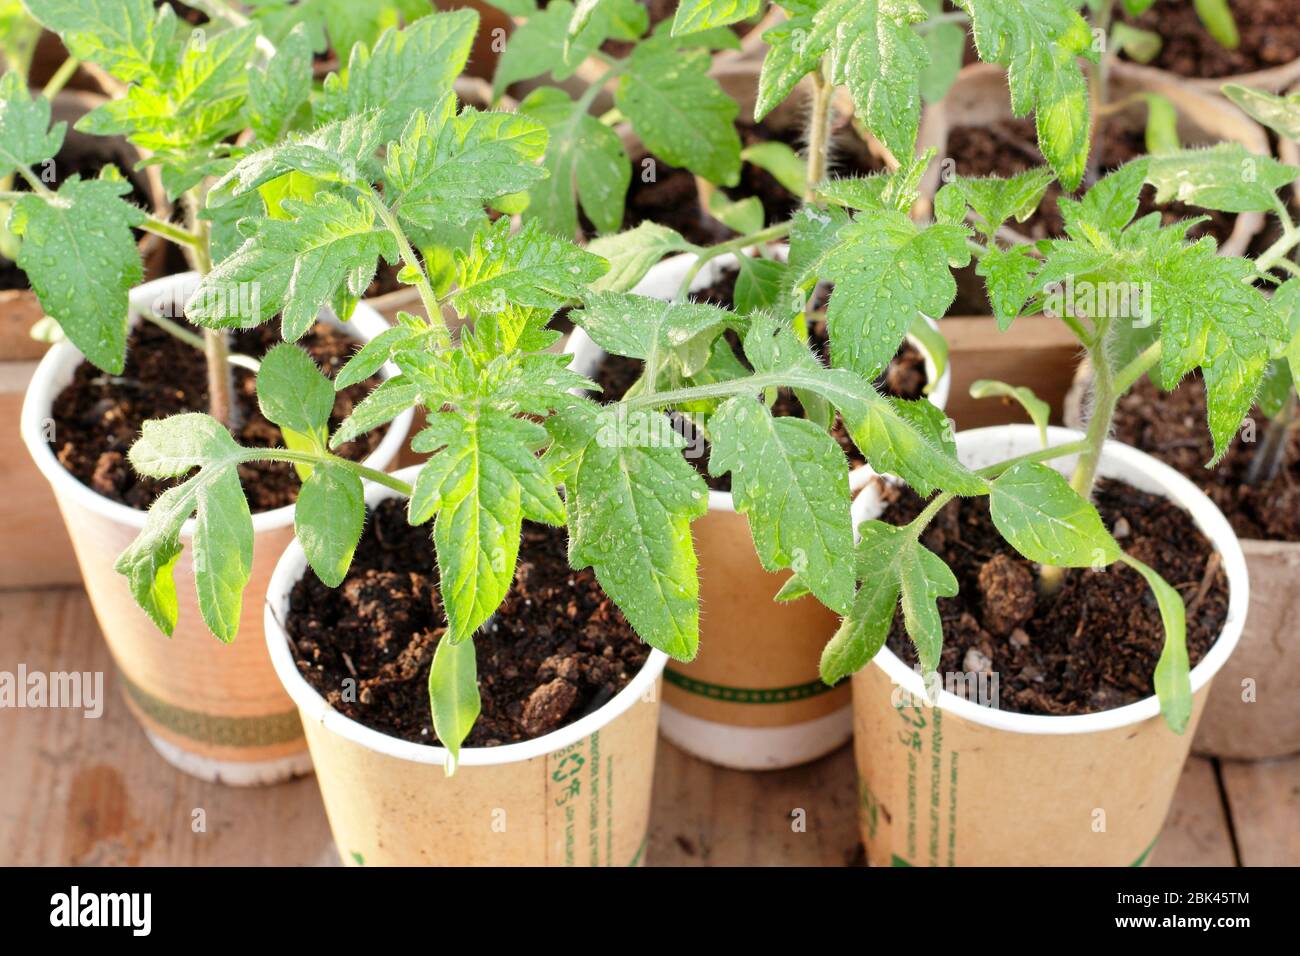 Solanum lycopersicum. Home grown tomato seedlings planted in upcycled compostable coffee cups during the coronavirus Covid 19 lockdown. UK Stock Photo